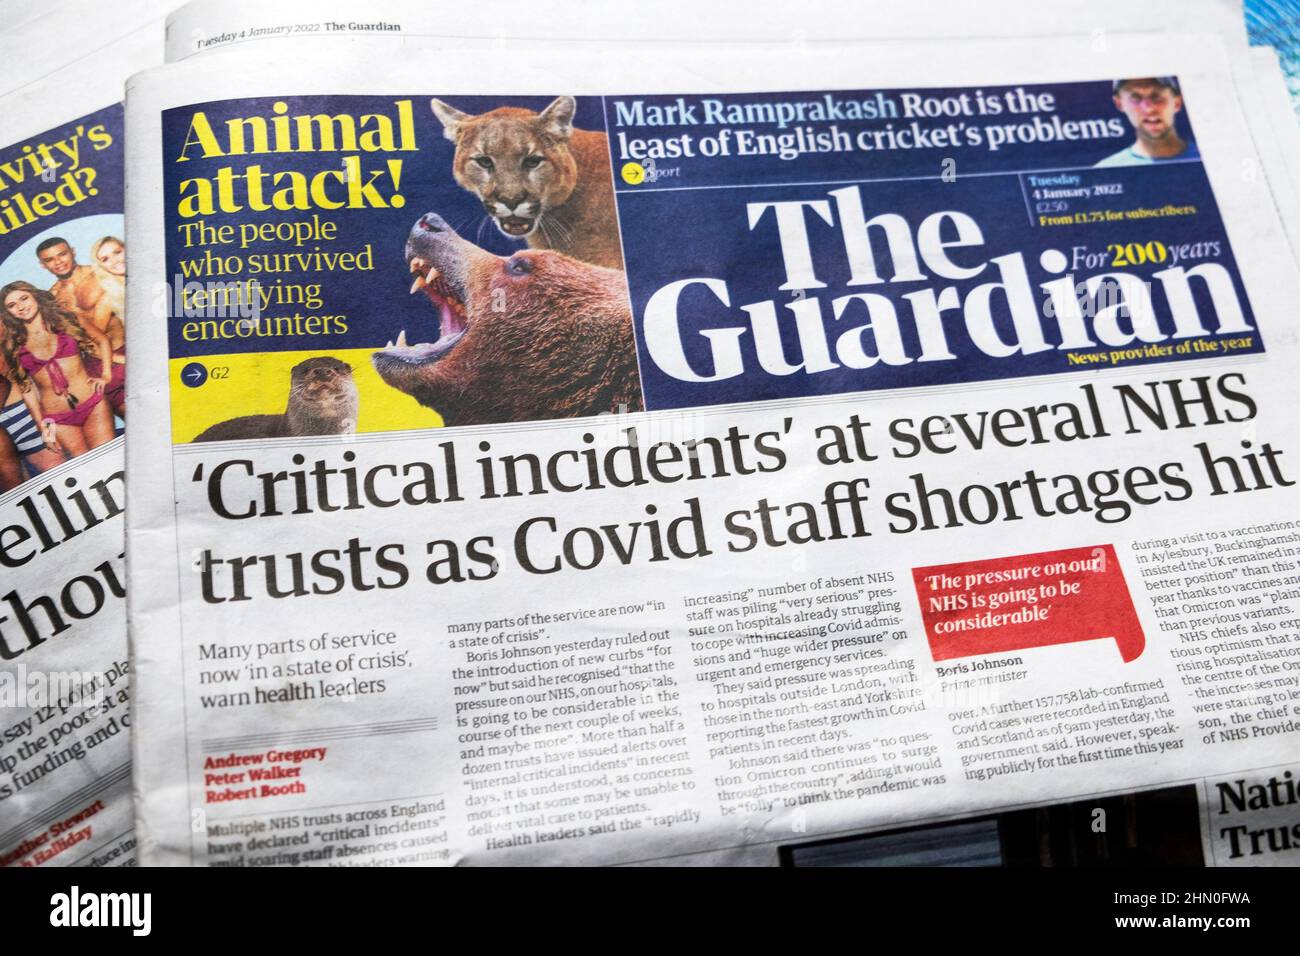 'Critical incidents' at several NHS trusts as Covid staff shortages hit' Guardian front page newspaper headline on 3 January 2022  London England UK Stock Photo